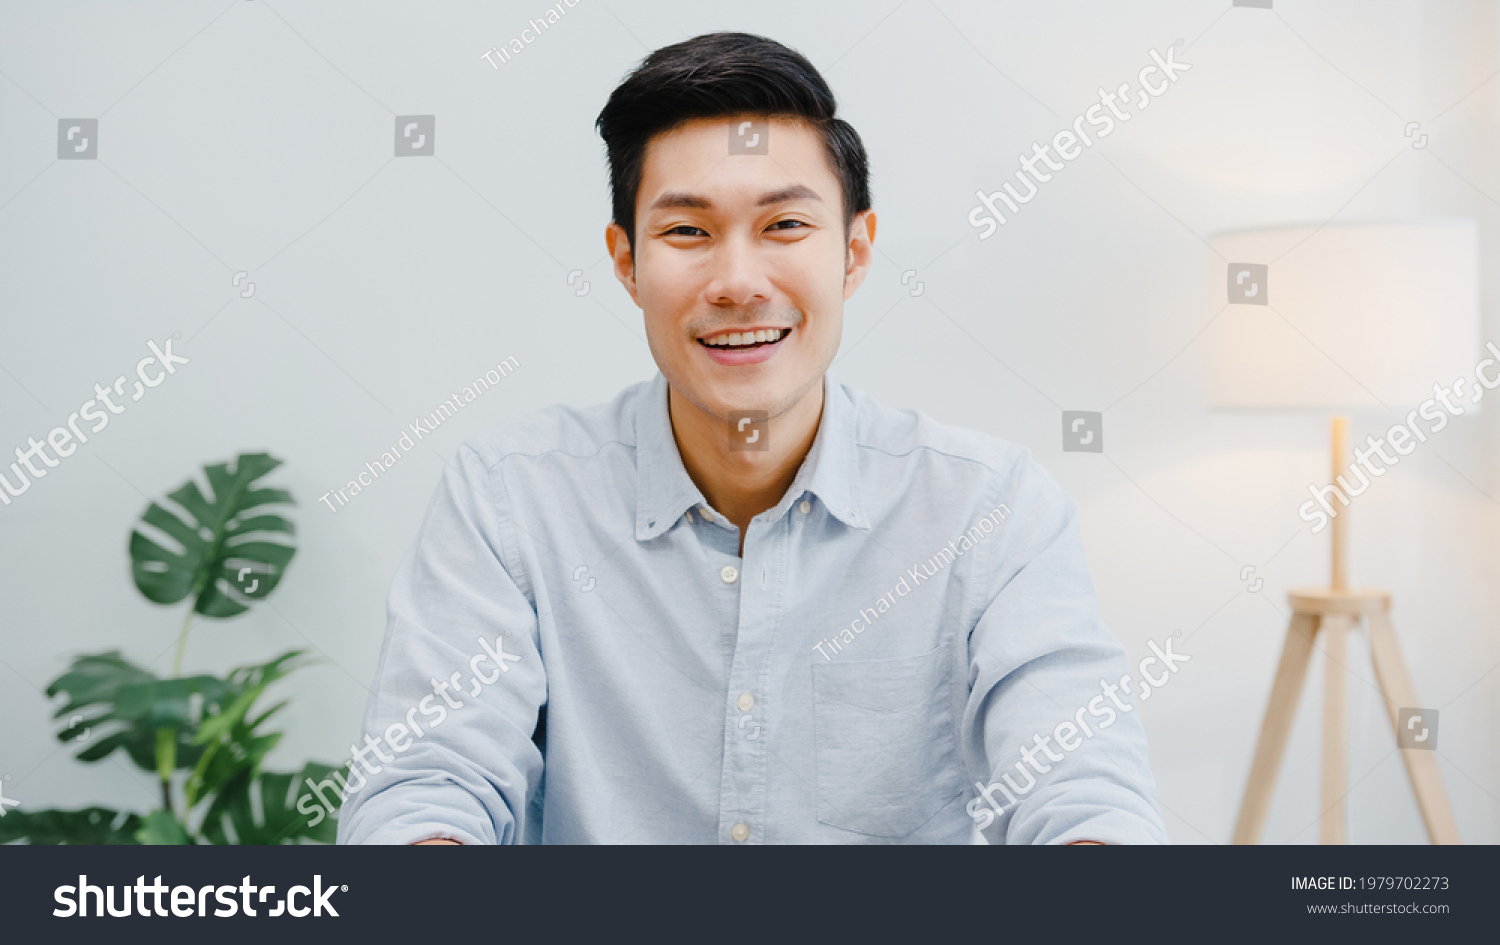 Portrait of successful handsome executive businessman smart casual wear looking at camera and smiling, happy in modern office workplace. Young Asia guy talk to colleague in video call meeting at home. #1979702273